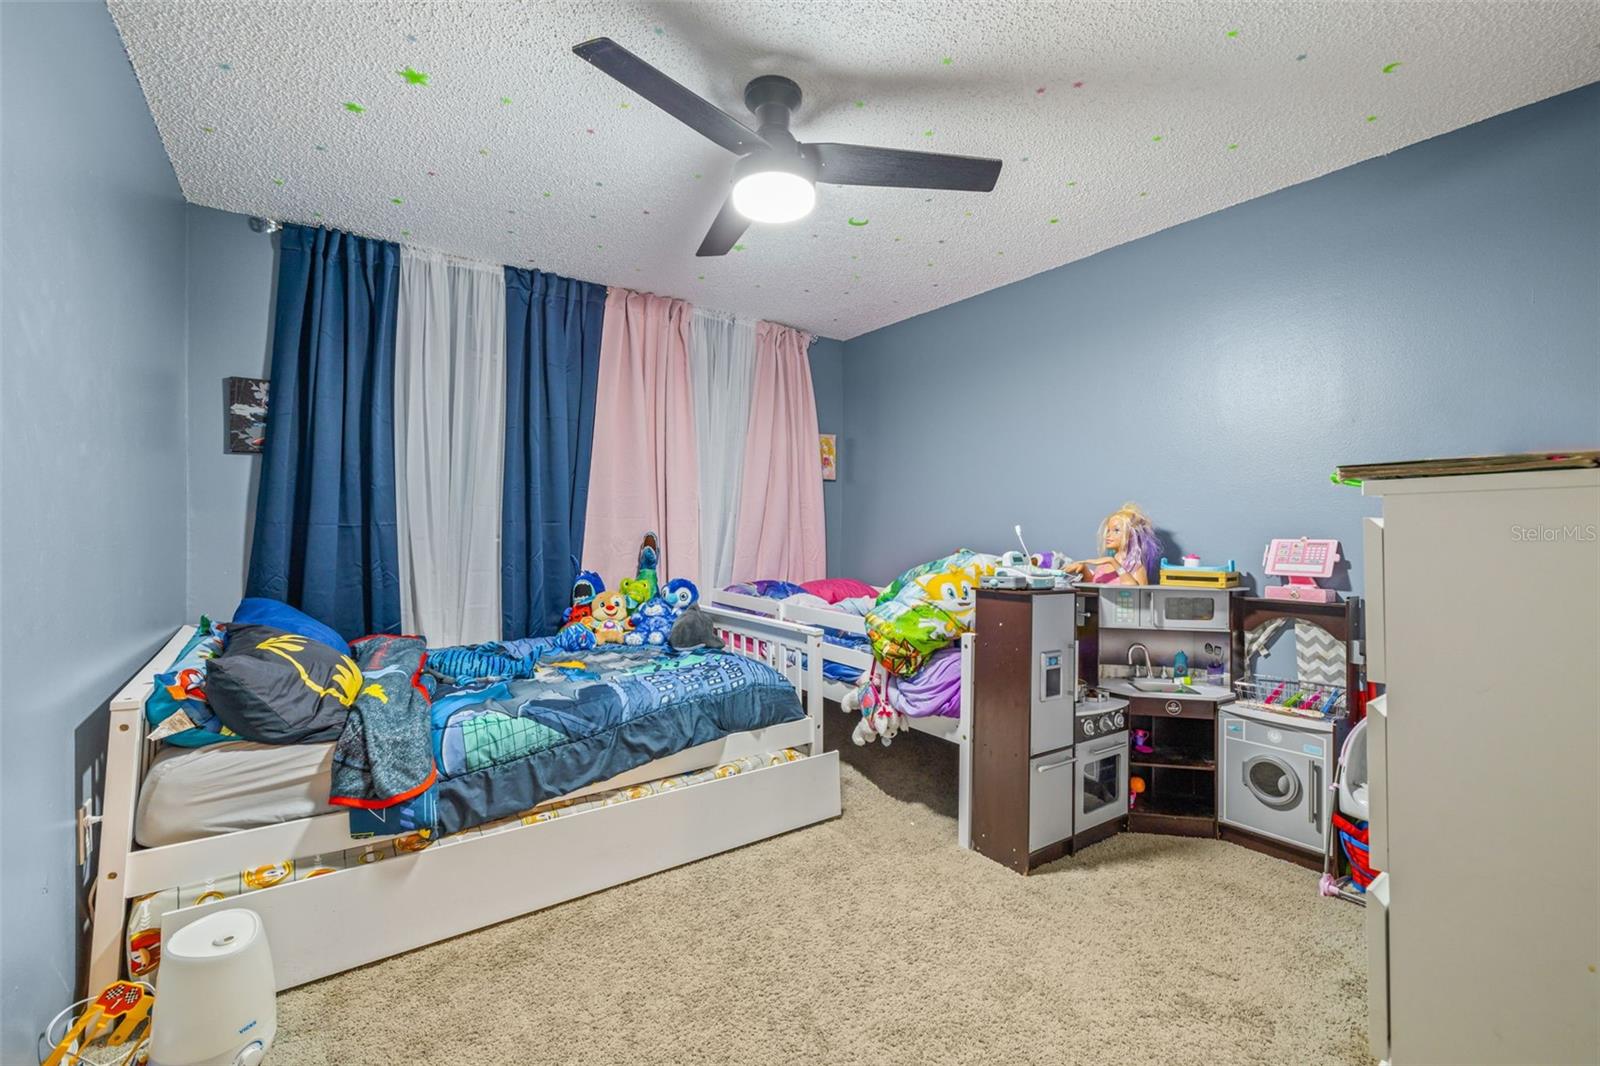 Secondary bedroom! Large room with ceiling fan and plenty of room for the kiddos toys!